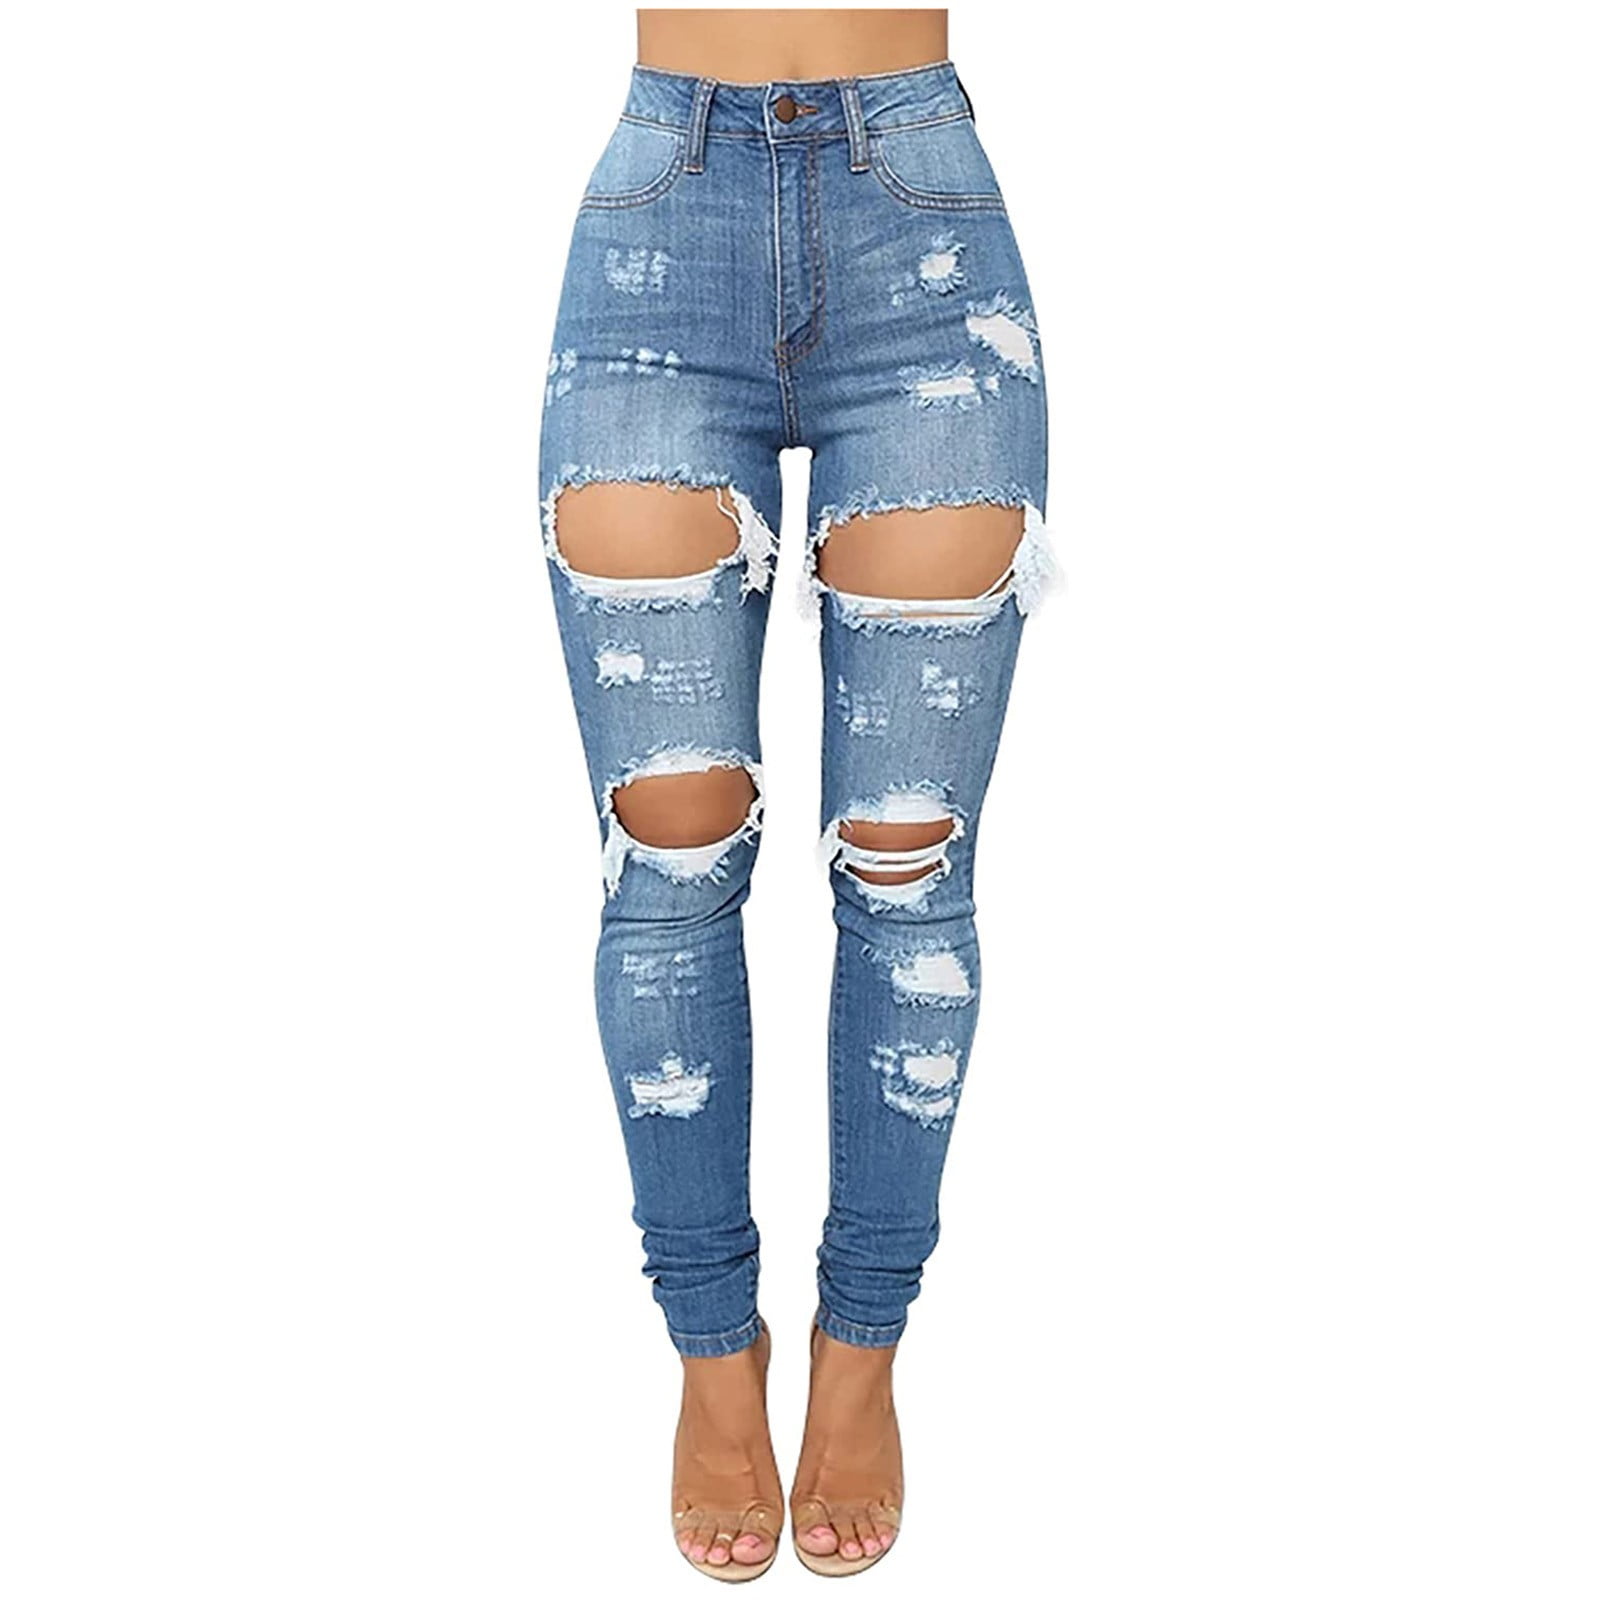 Women's High Waisted Ripped Jeans For Women Lift Distressed Stretch Juniors  Skinny Jeanswomen's slim bootcut jeans women's low jeans women's jeans